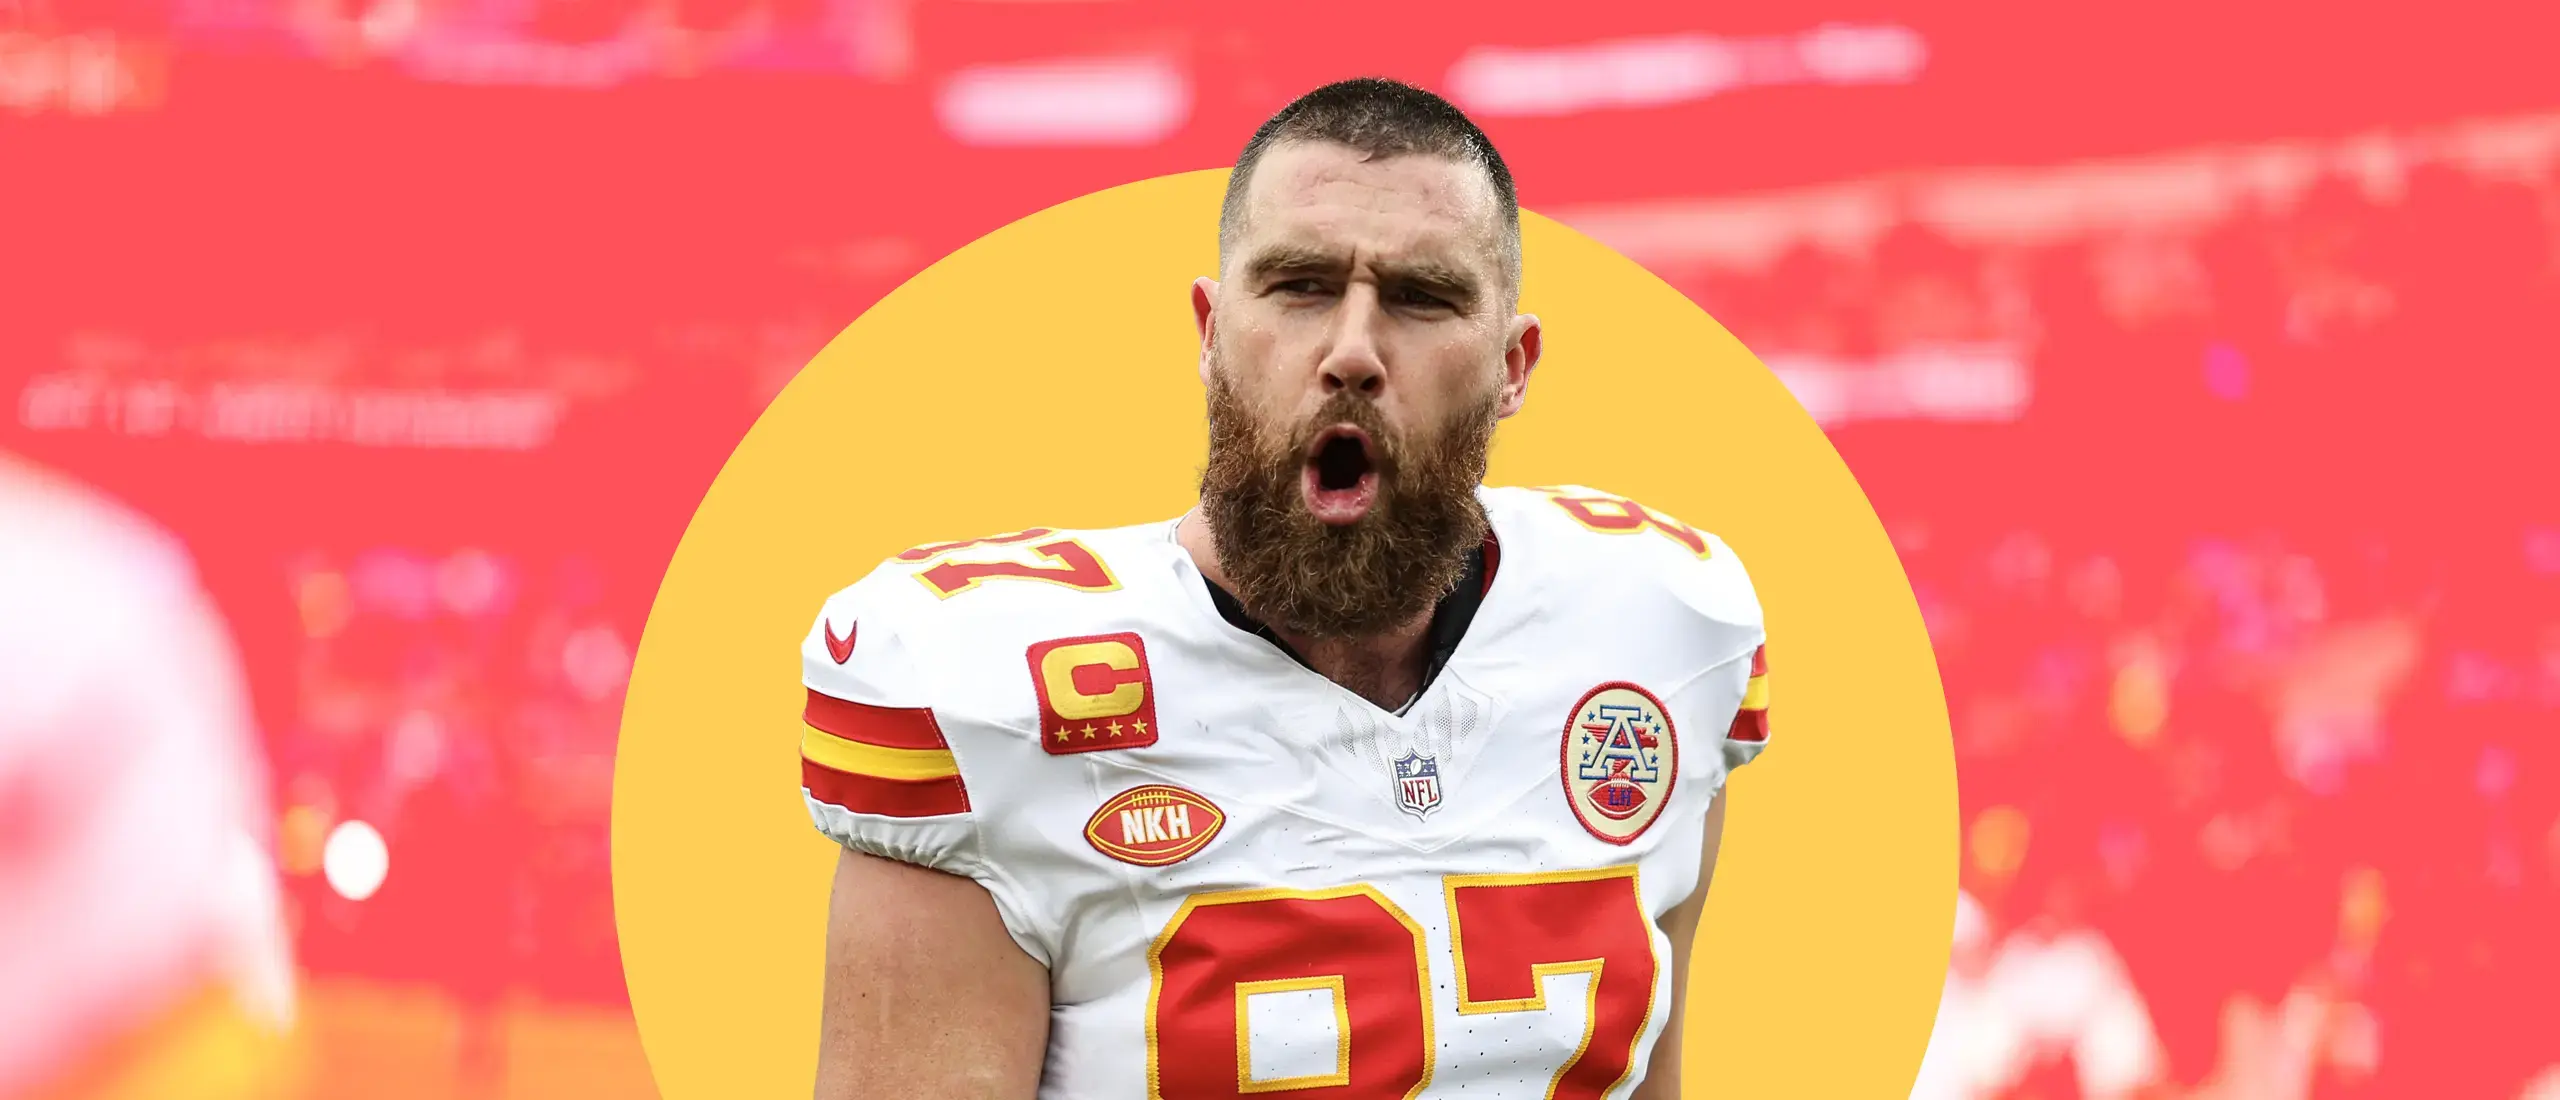 Travis Kelce's Super Bowl Optimization Routine: Diet and Workout